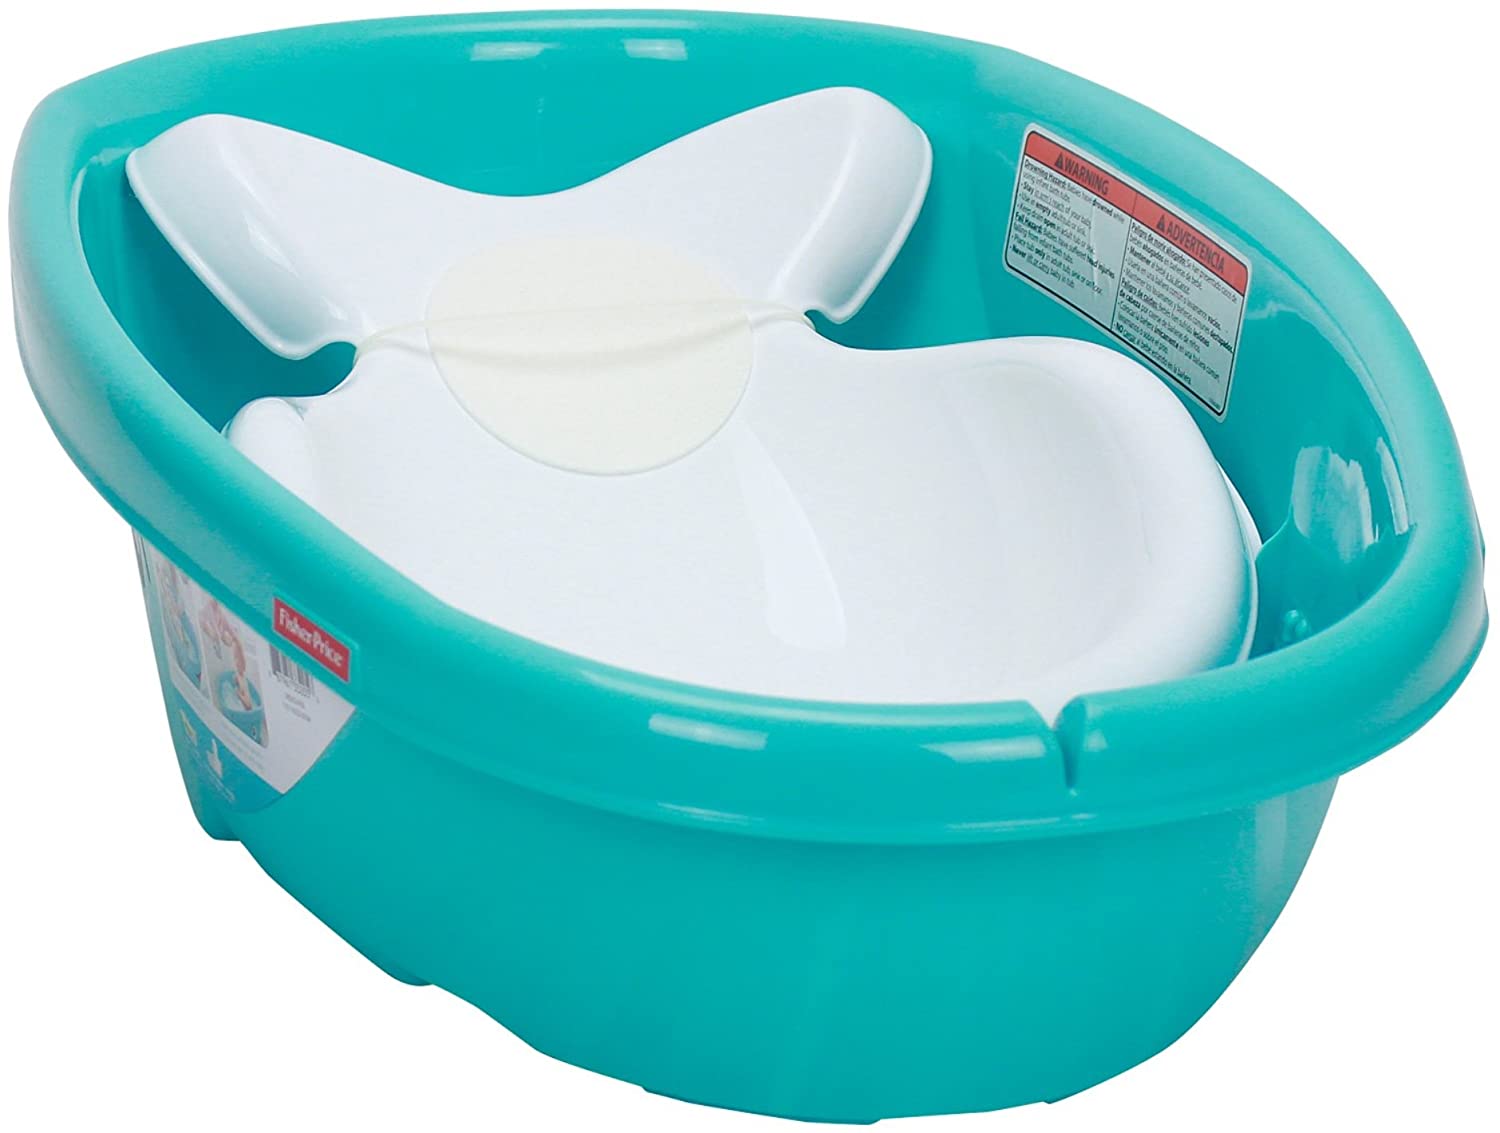 Top 7 Best Infant Tubs For Newborn Reviews in 2023 2